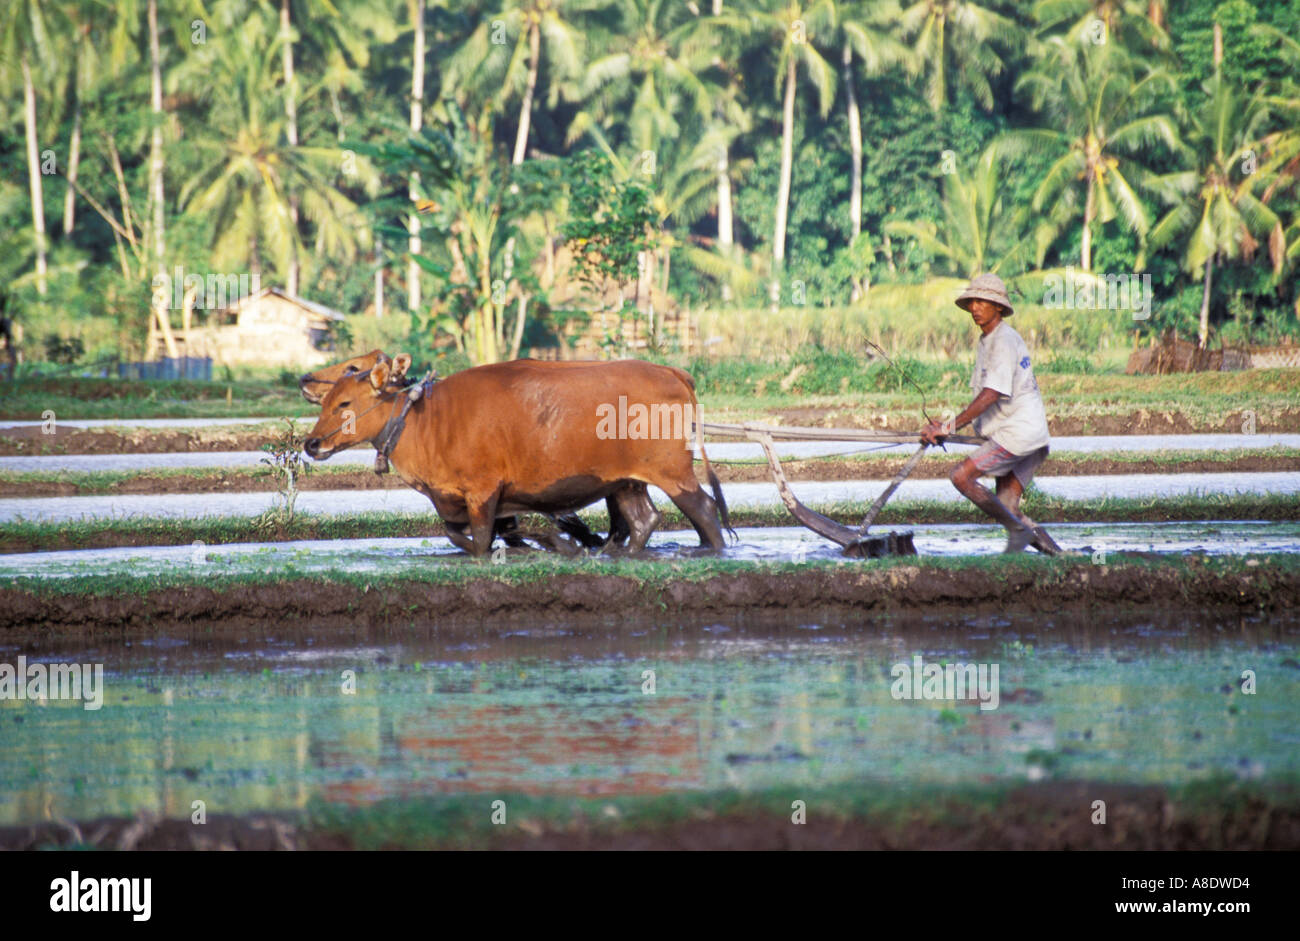 Bali Farmer Plowing And Working Rice Paddy Indonesia Stock Photo